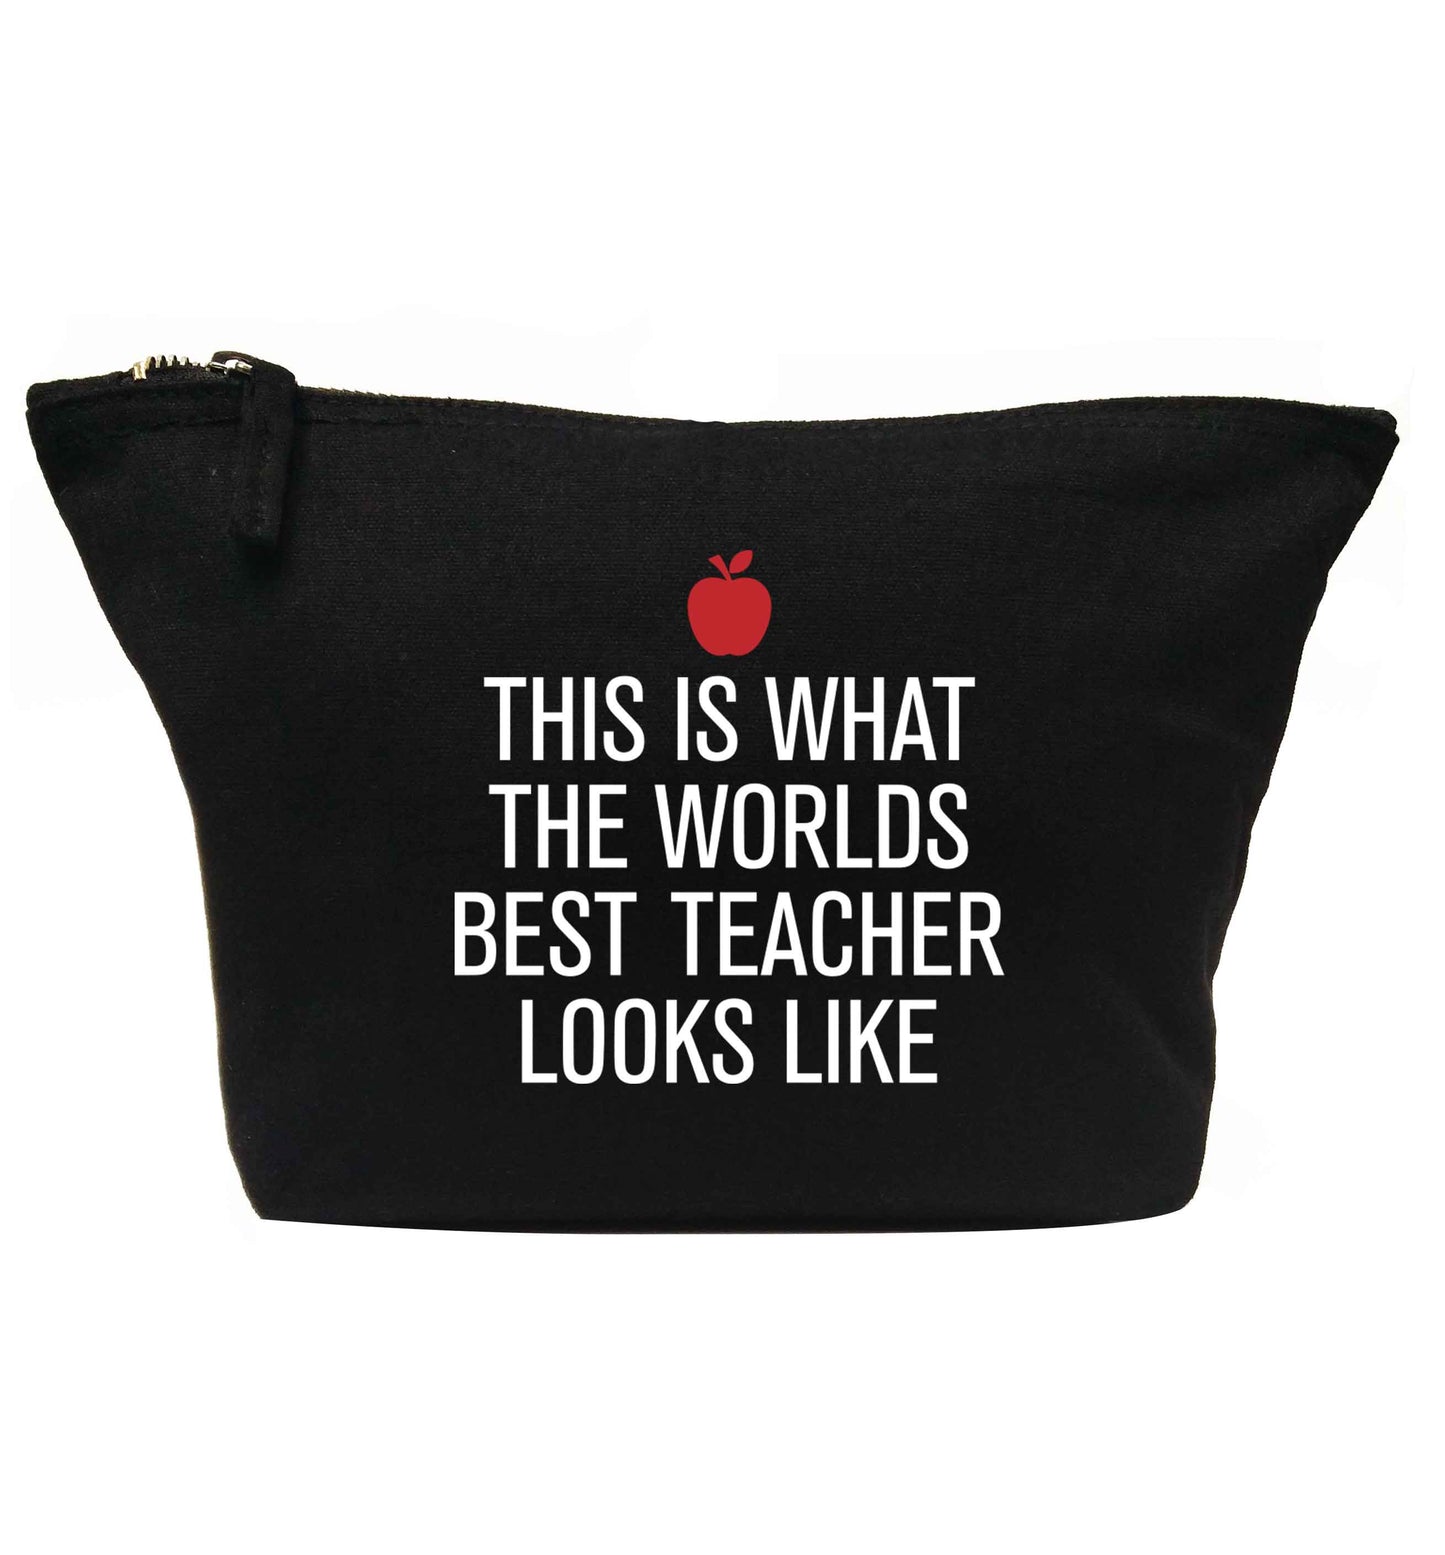 This is what the worlds best teacher looks like | Makeup / wash bag